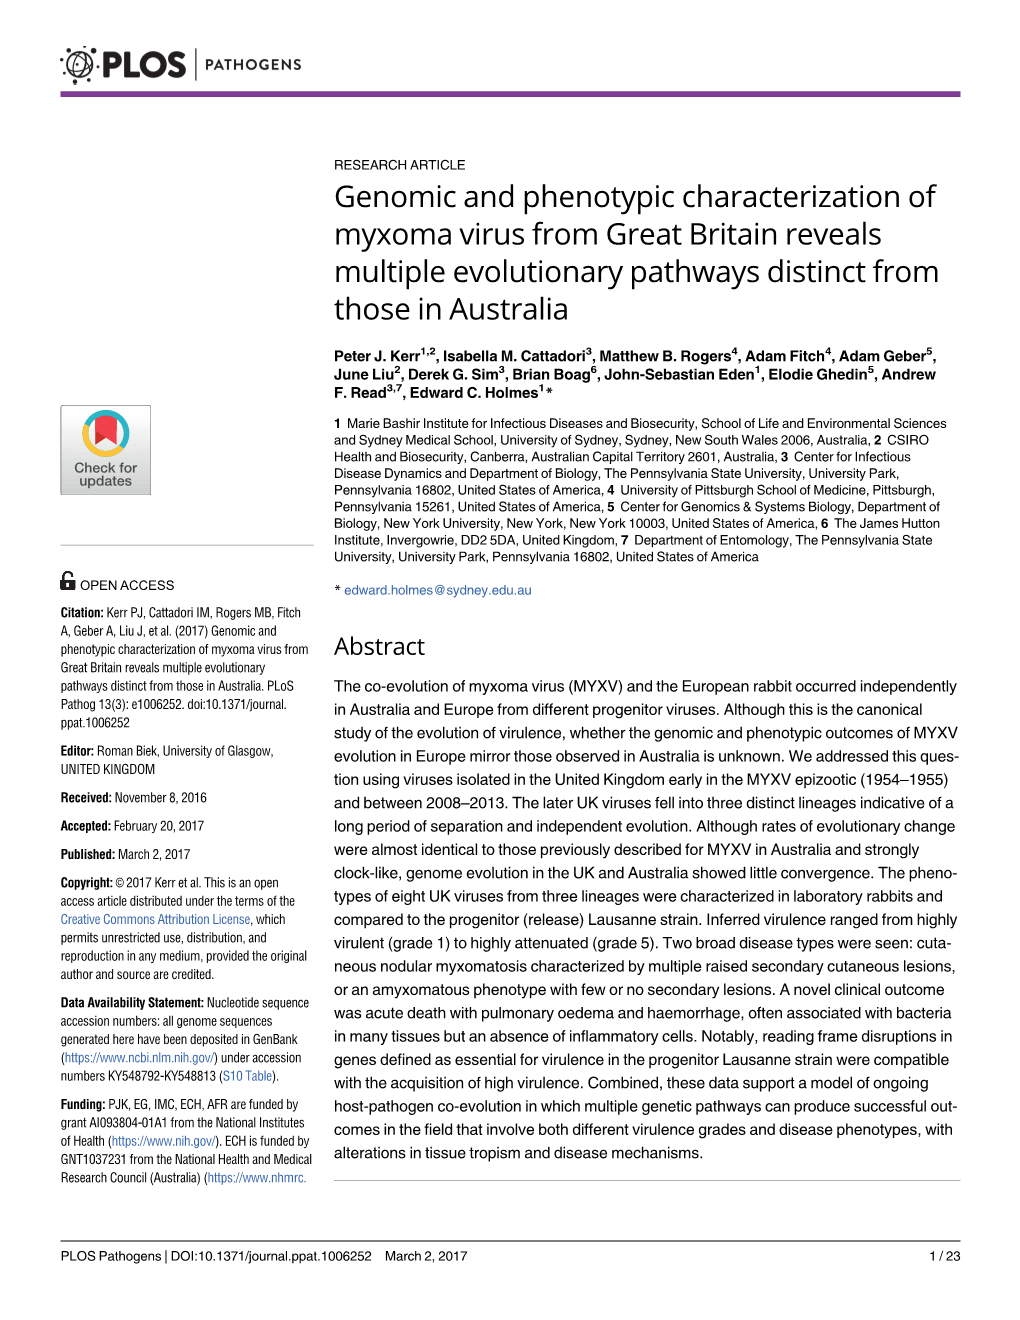 Genomic and Phenotypic Characterization of Myxoma Virus from Great Britain Reveals Multiple Evolutionary Pathways Distinct from Those in Australia